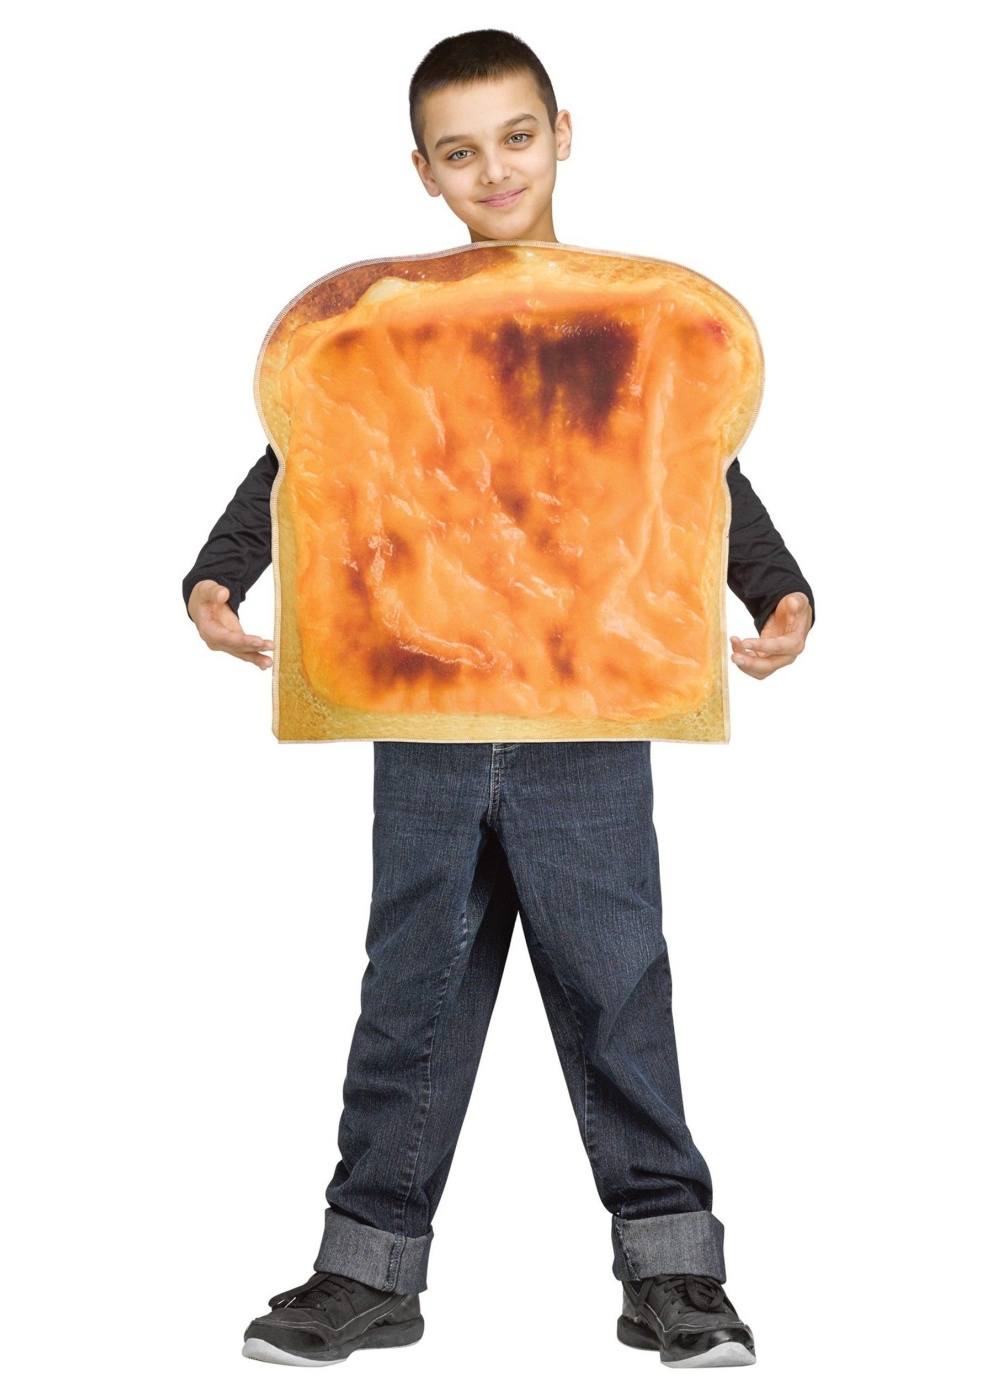  Boys Grilled Cheese Costume